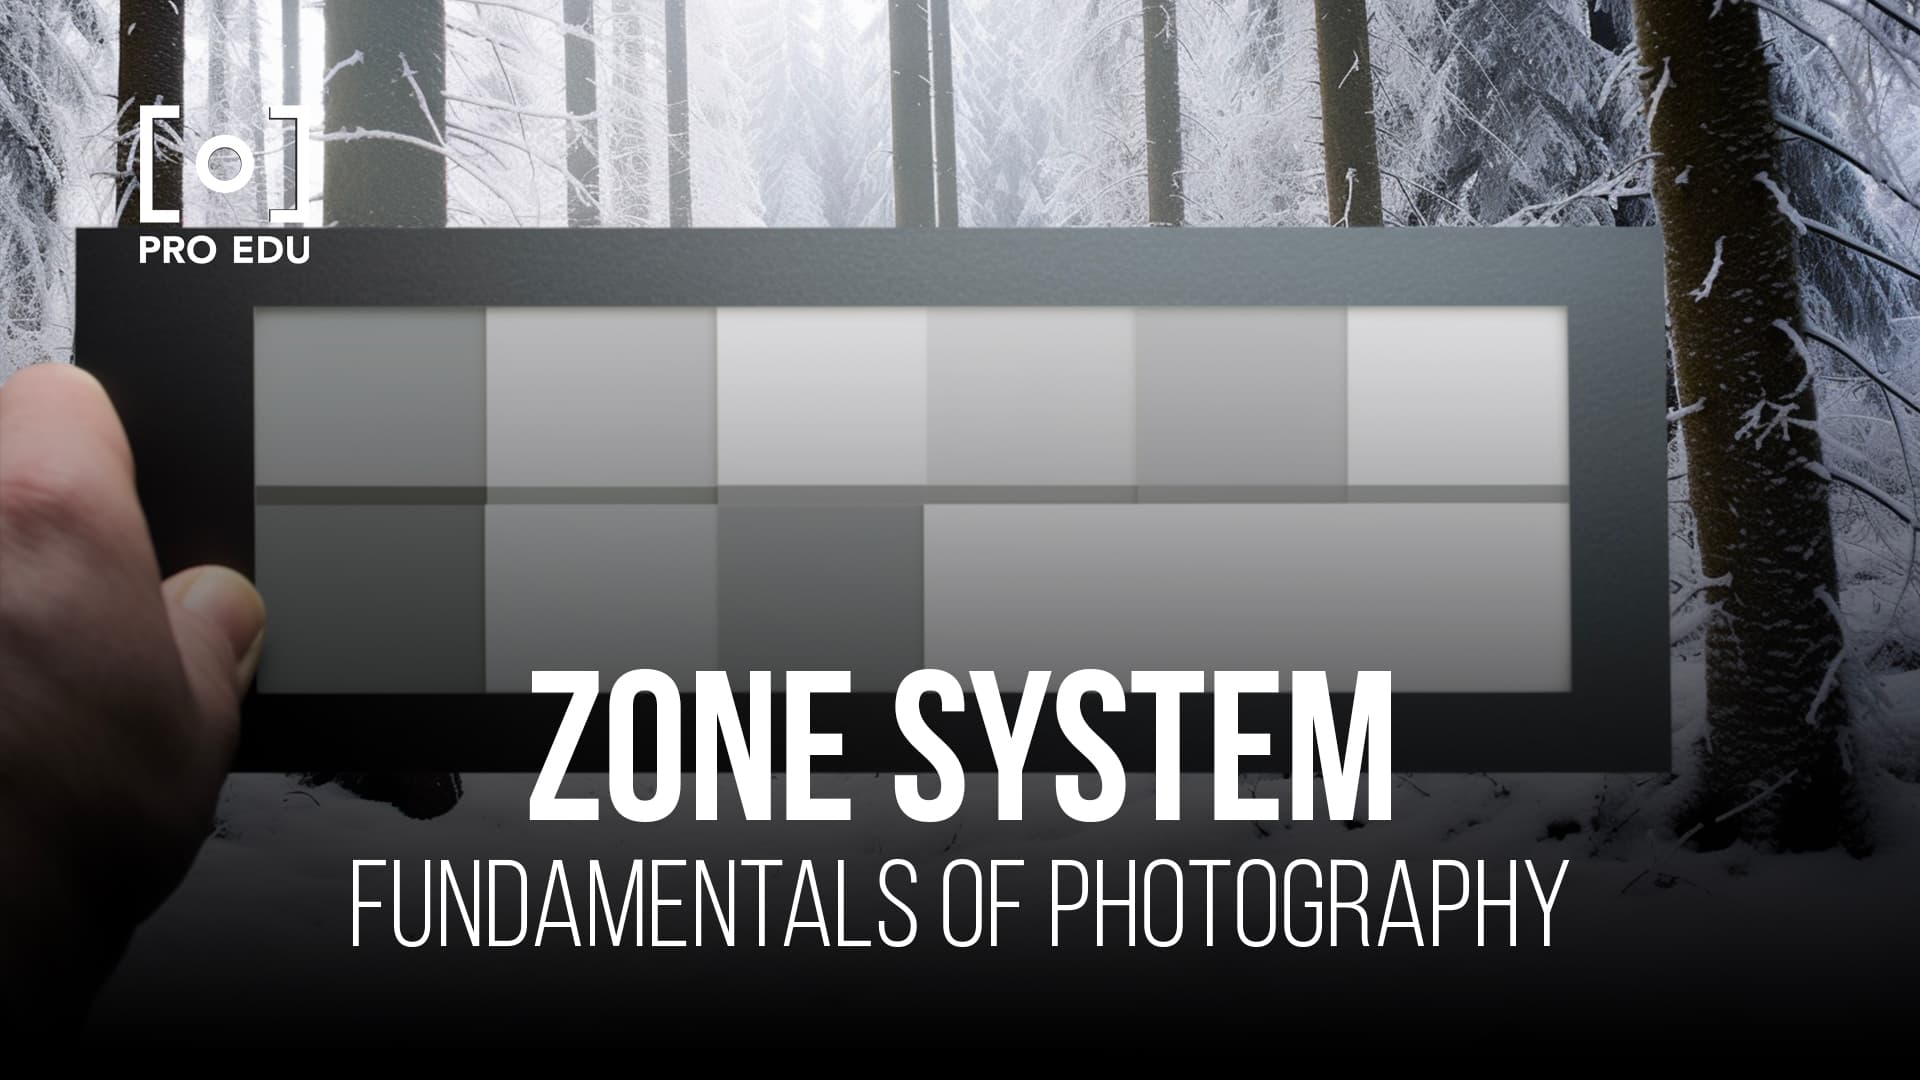 Expert photographer applying Zone System principles for optimal exposure and contrast